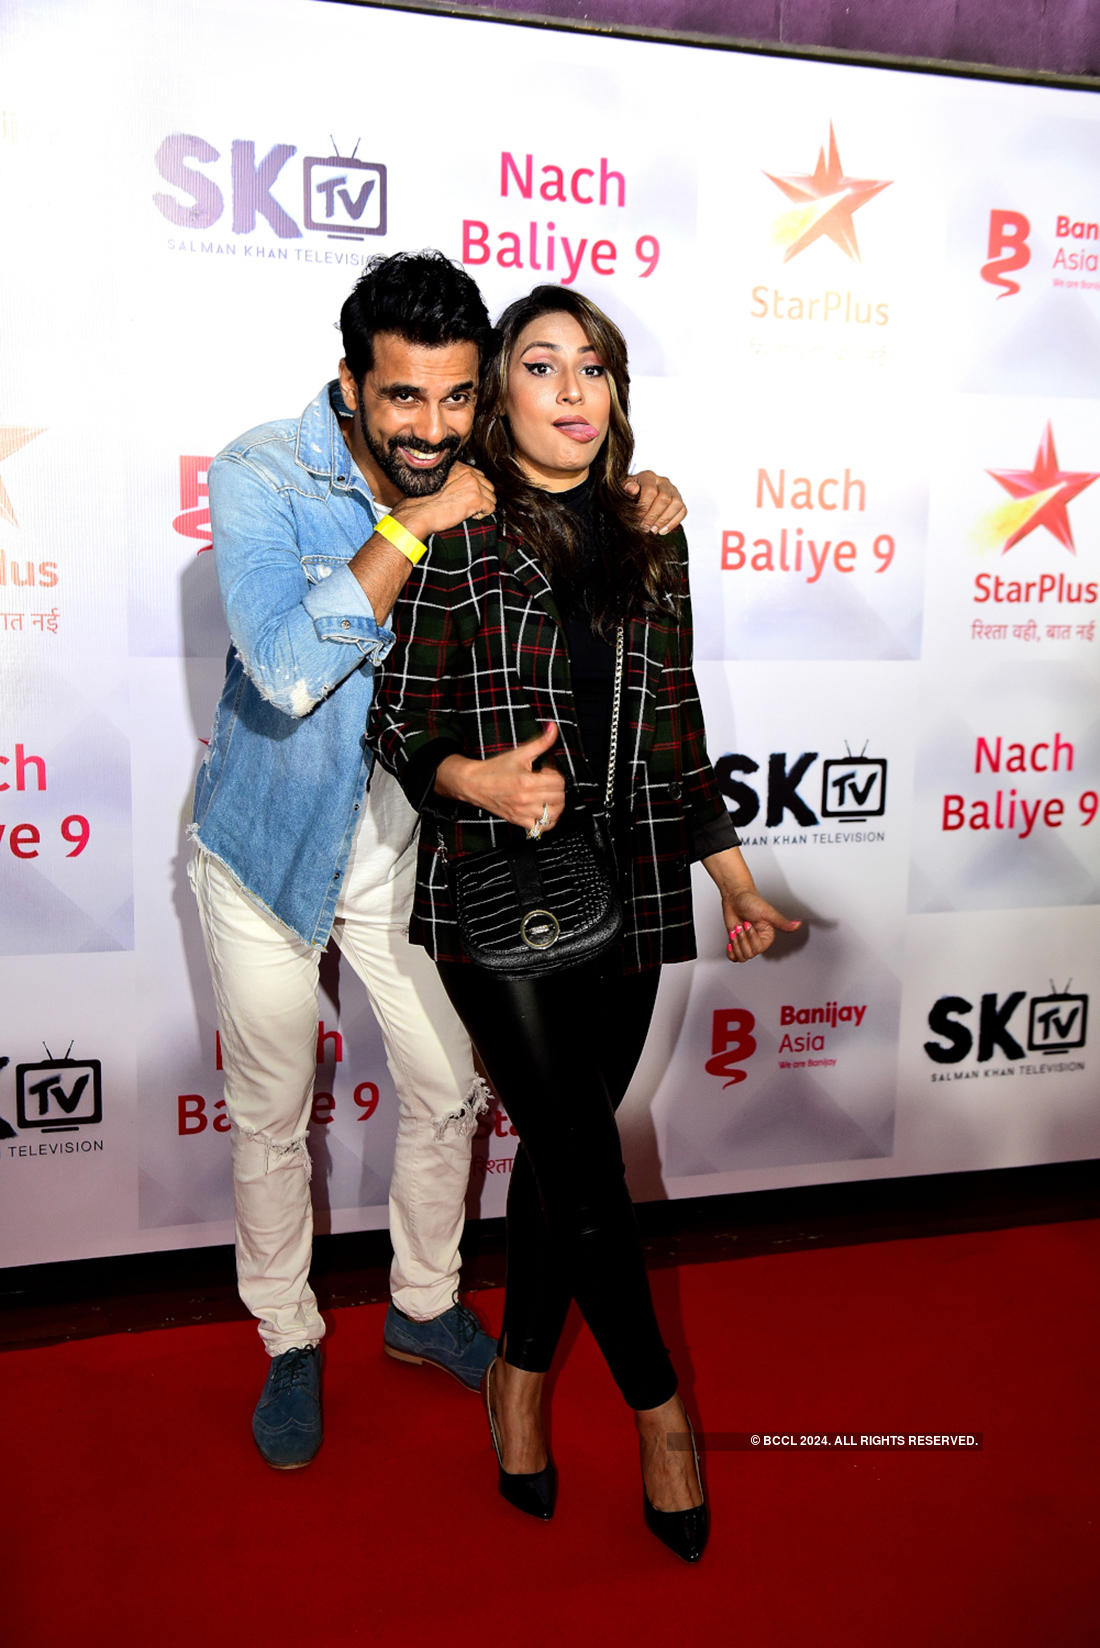 Nach Baliye 9 Success Party: Pictures of celebrities shining bright at the Red Carpet